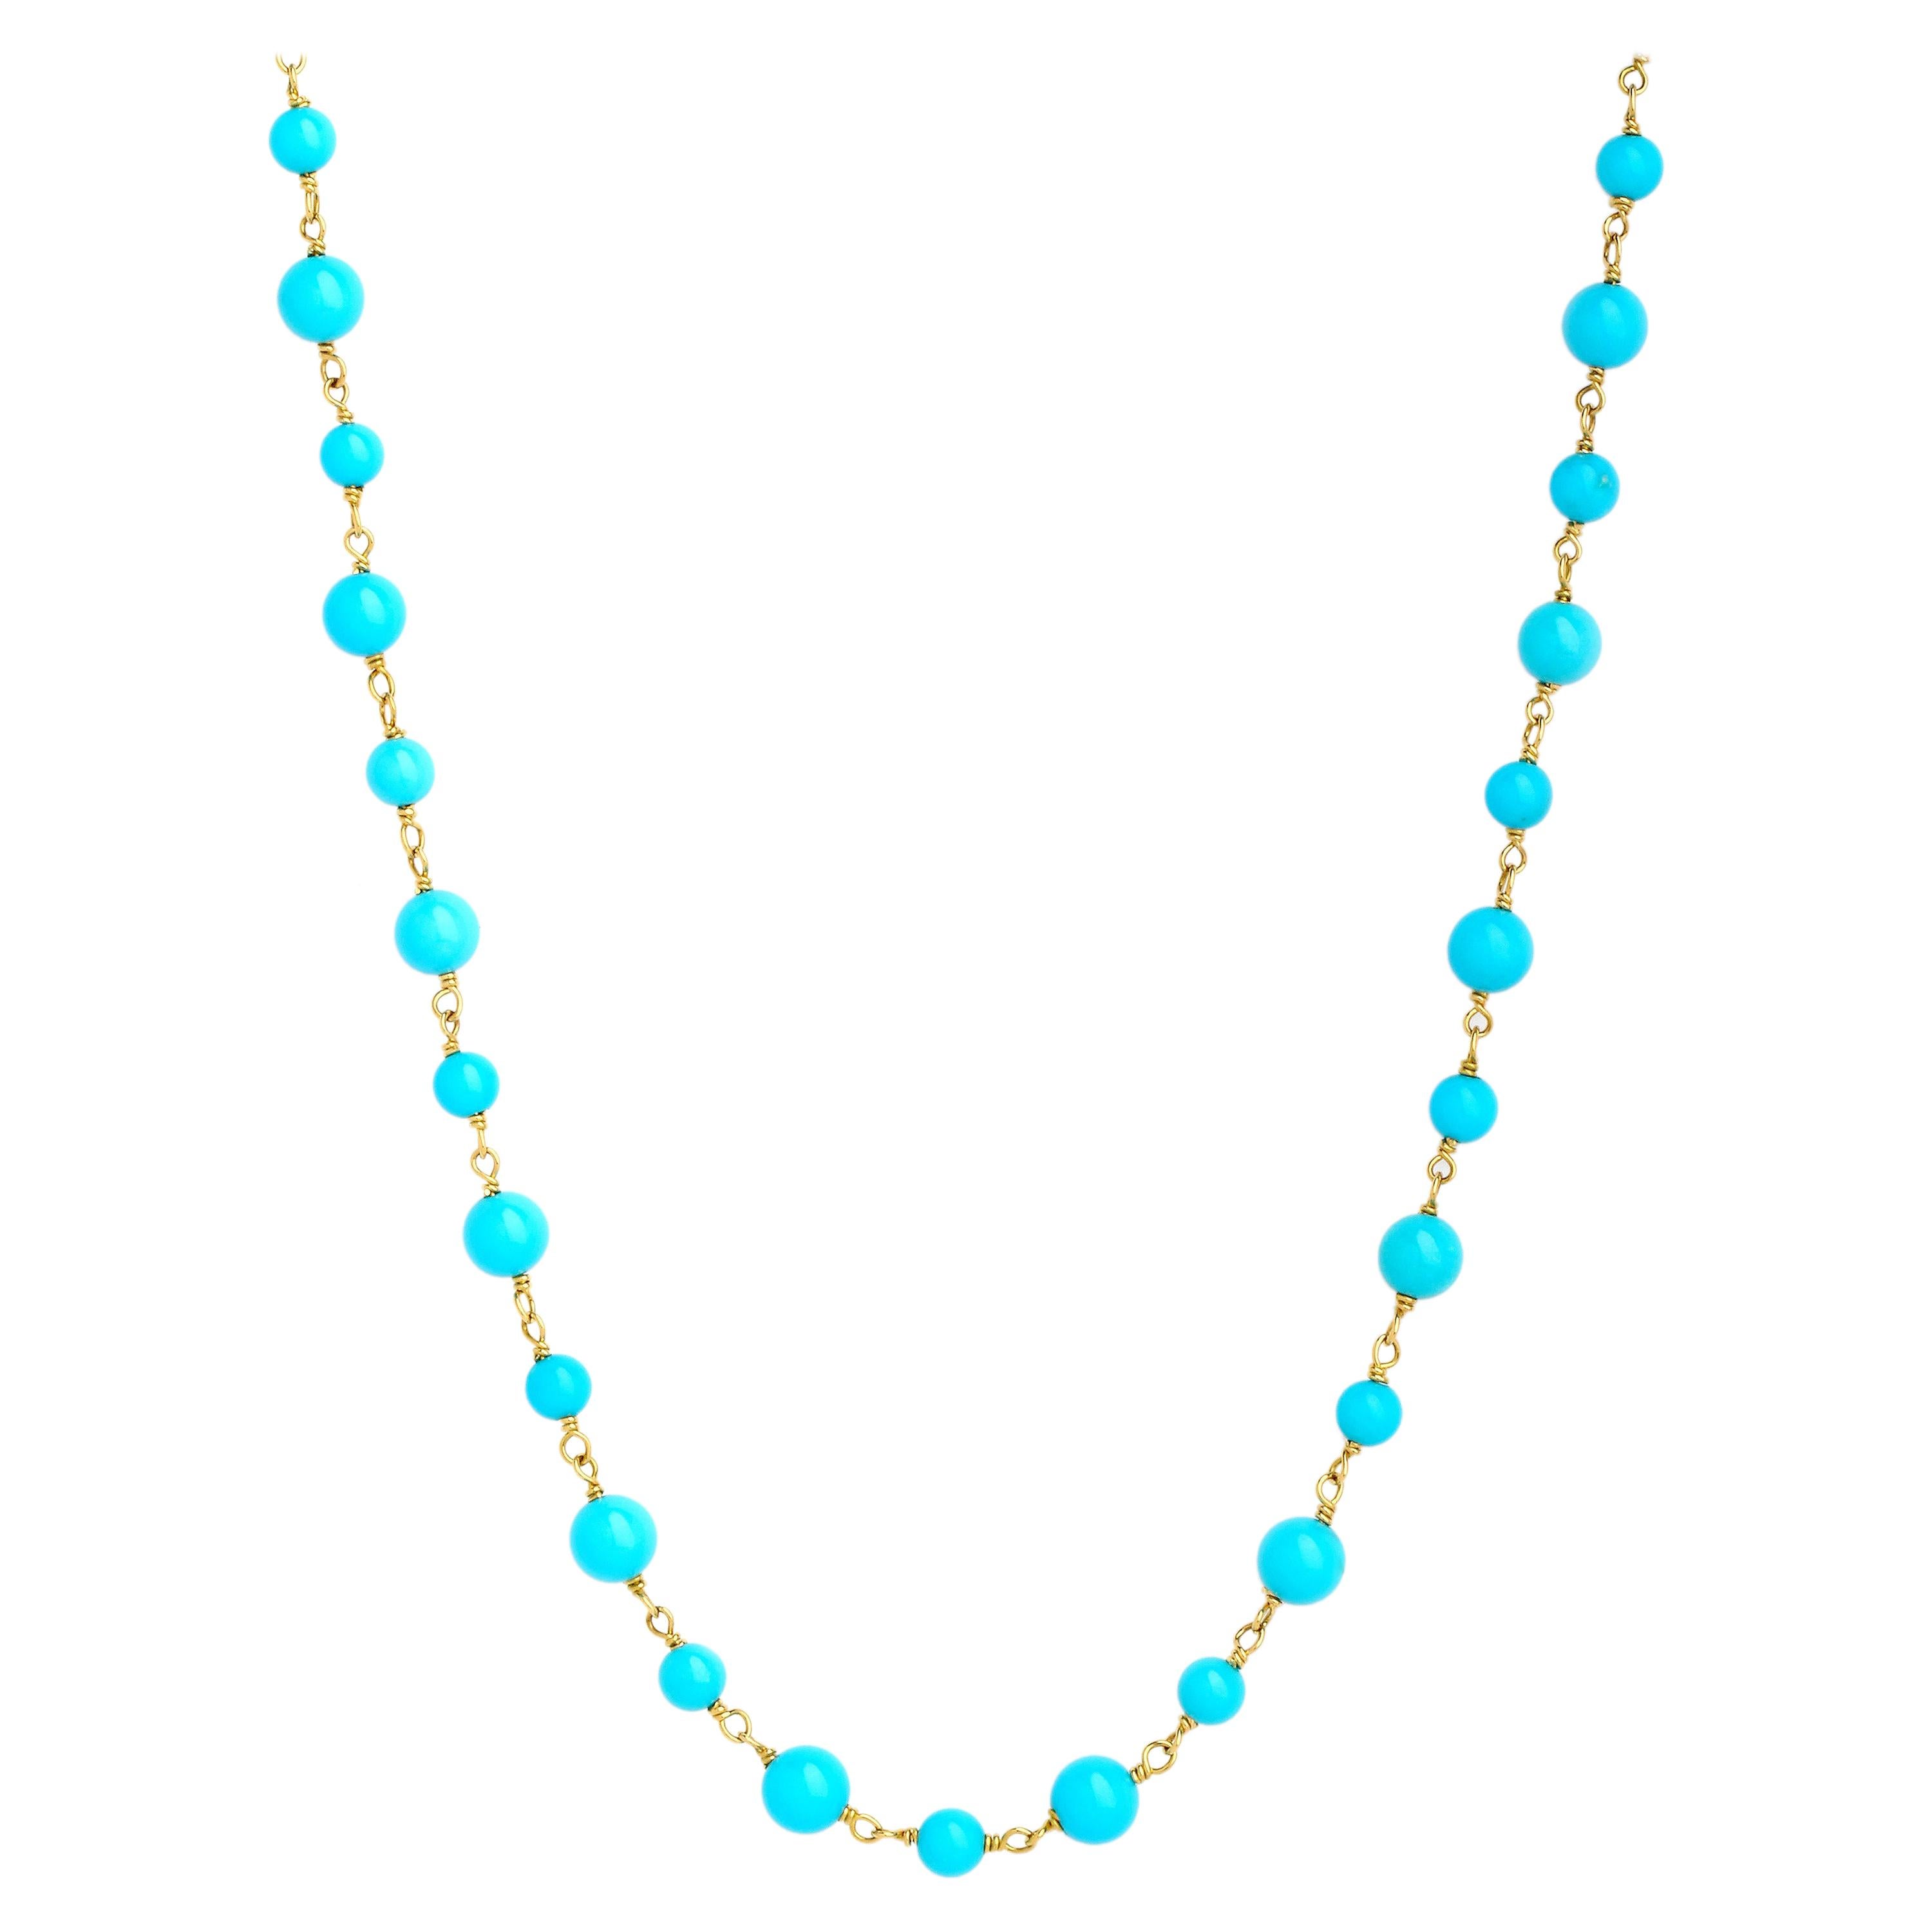 Syna Collier Sleeping Beauty en or jaune et turquoise